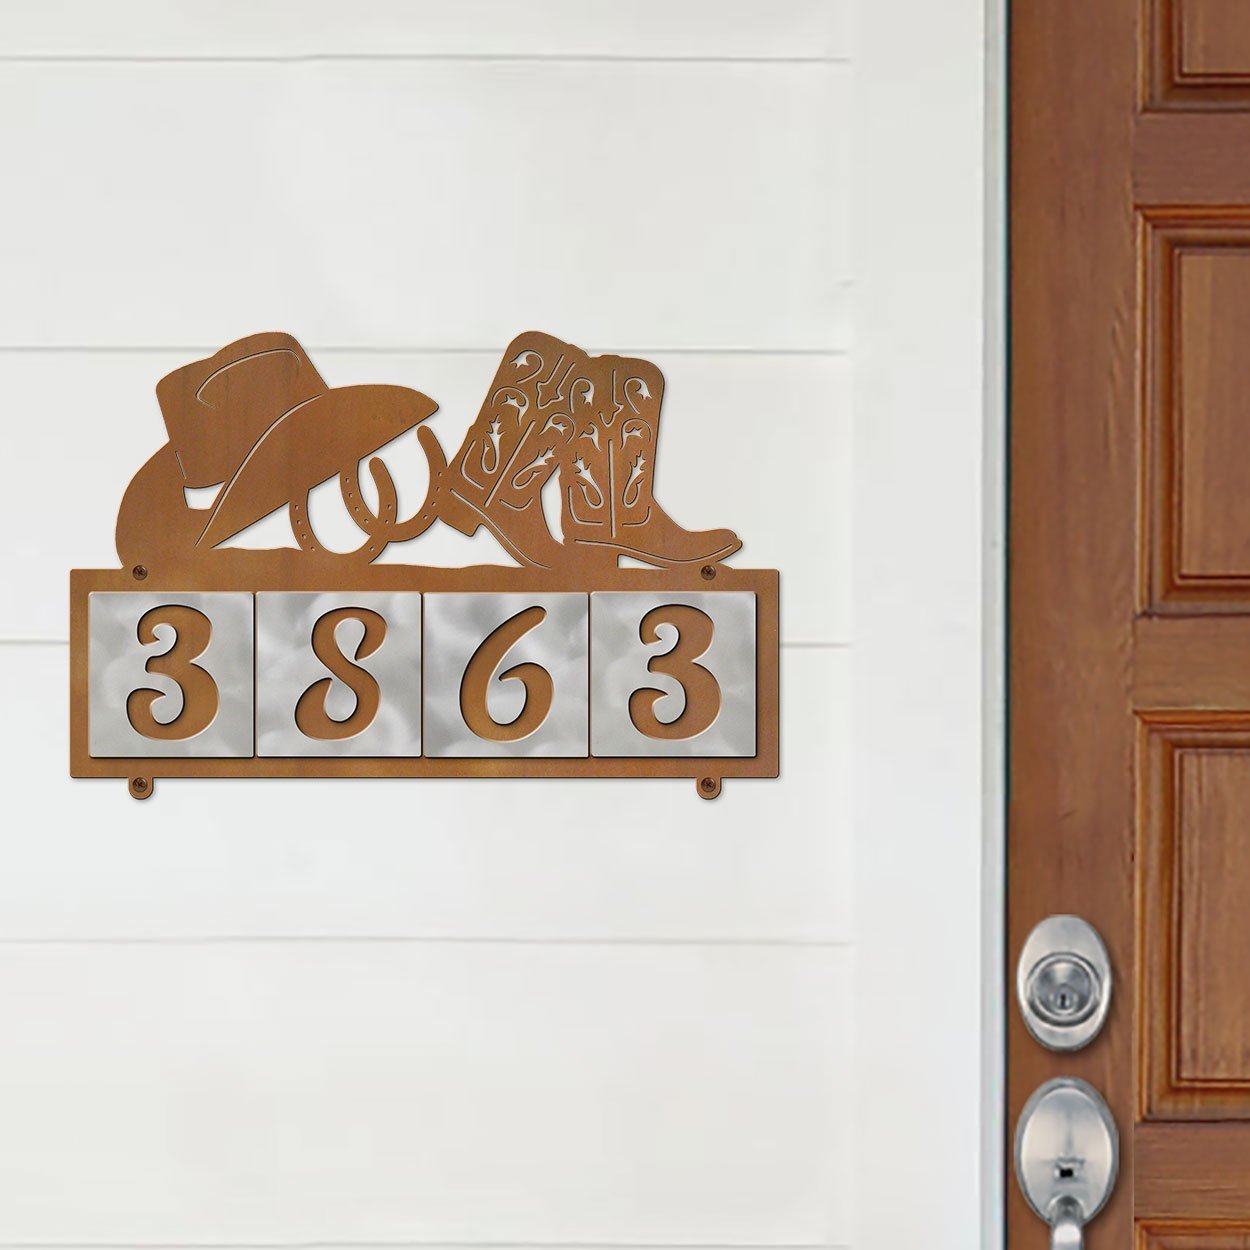 609044 - XL Cowboy Boots with Hat and Horseshoes Design 4-Digit Horizontal 6in Tile Outdoor House Numbers